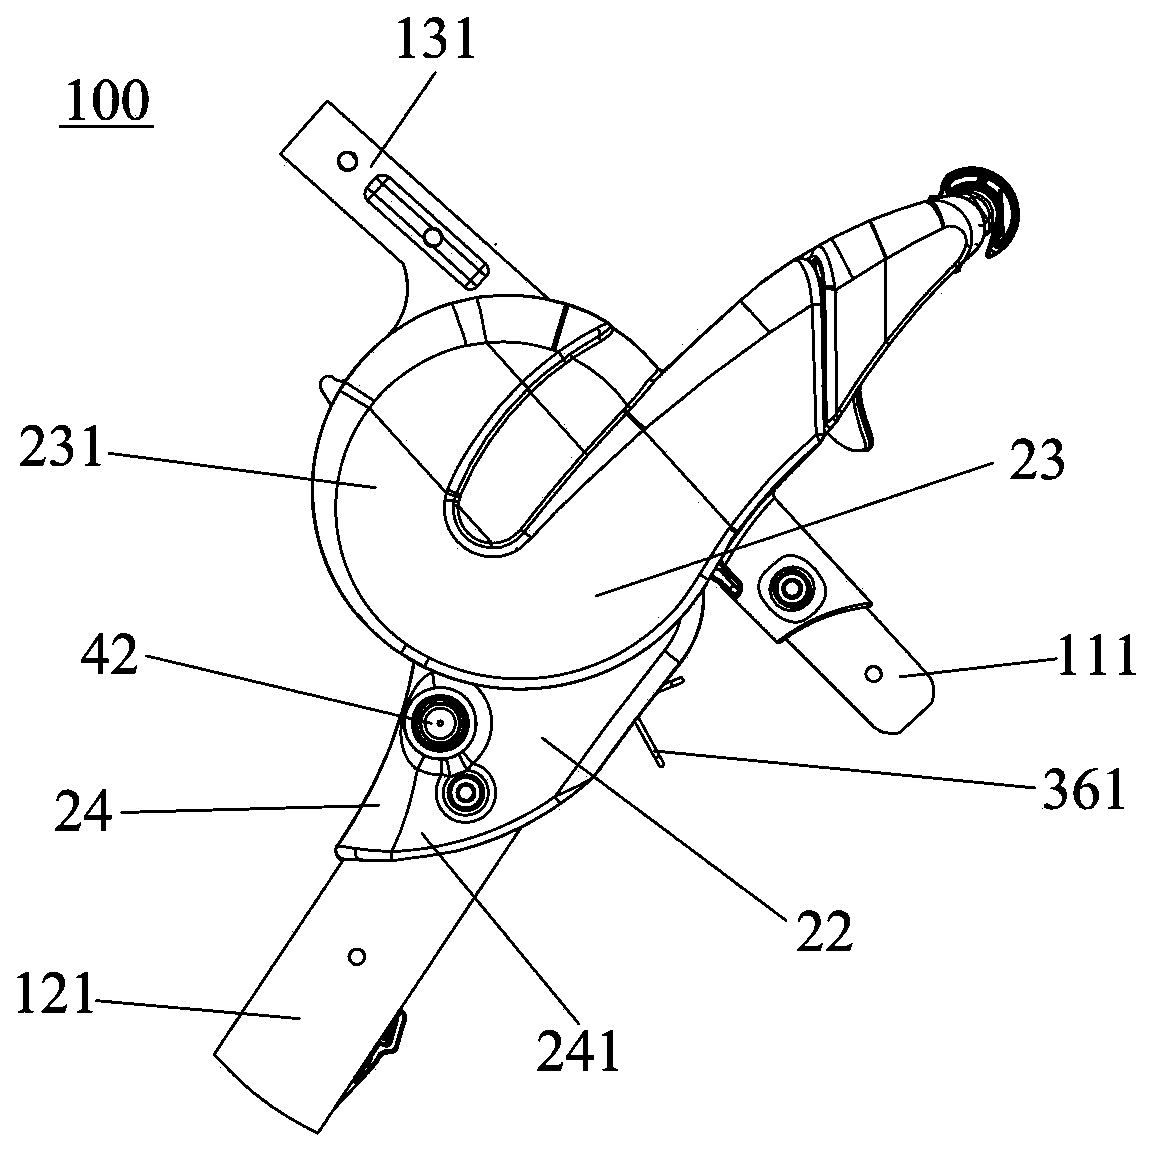 Secondary locking mechanism and foldable frame